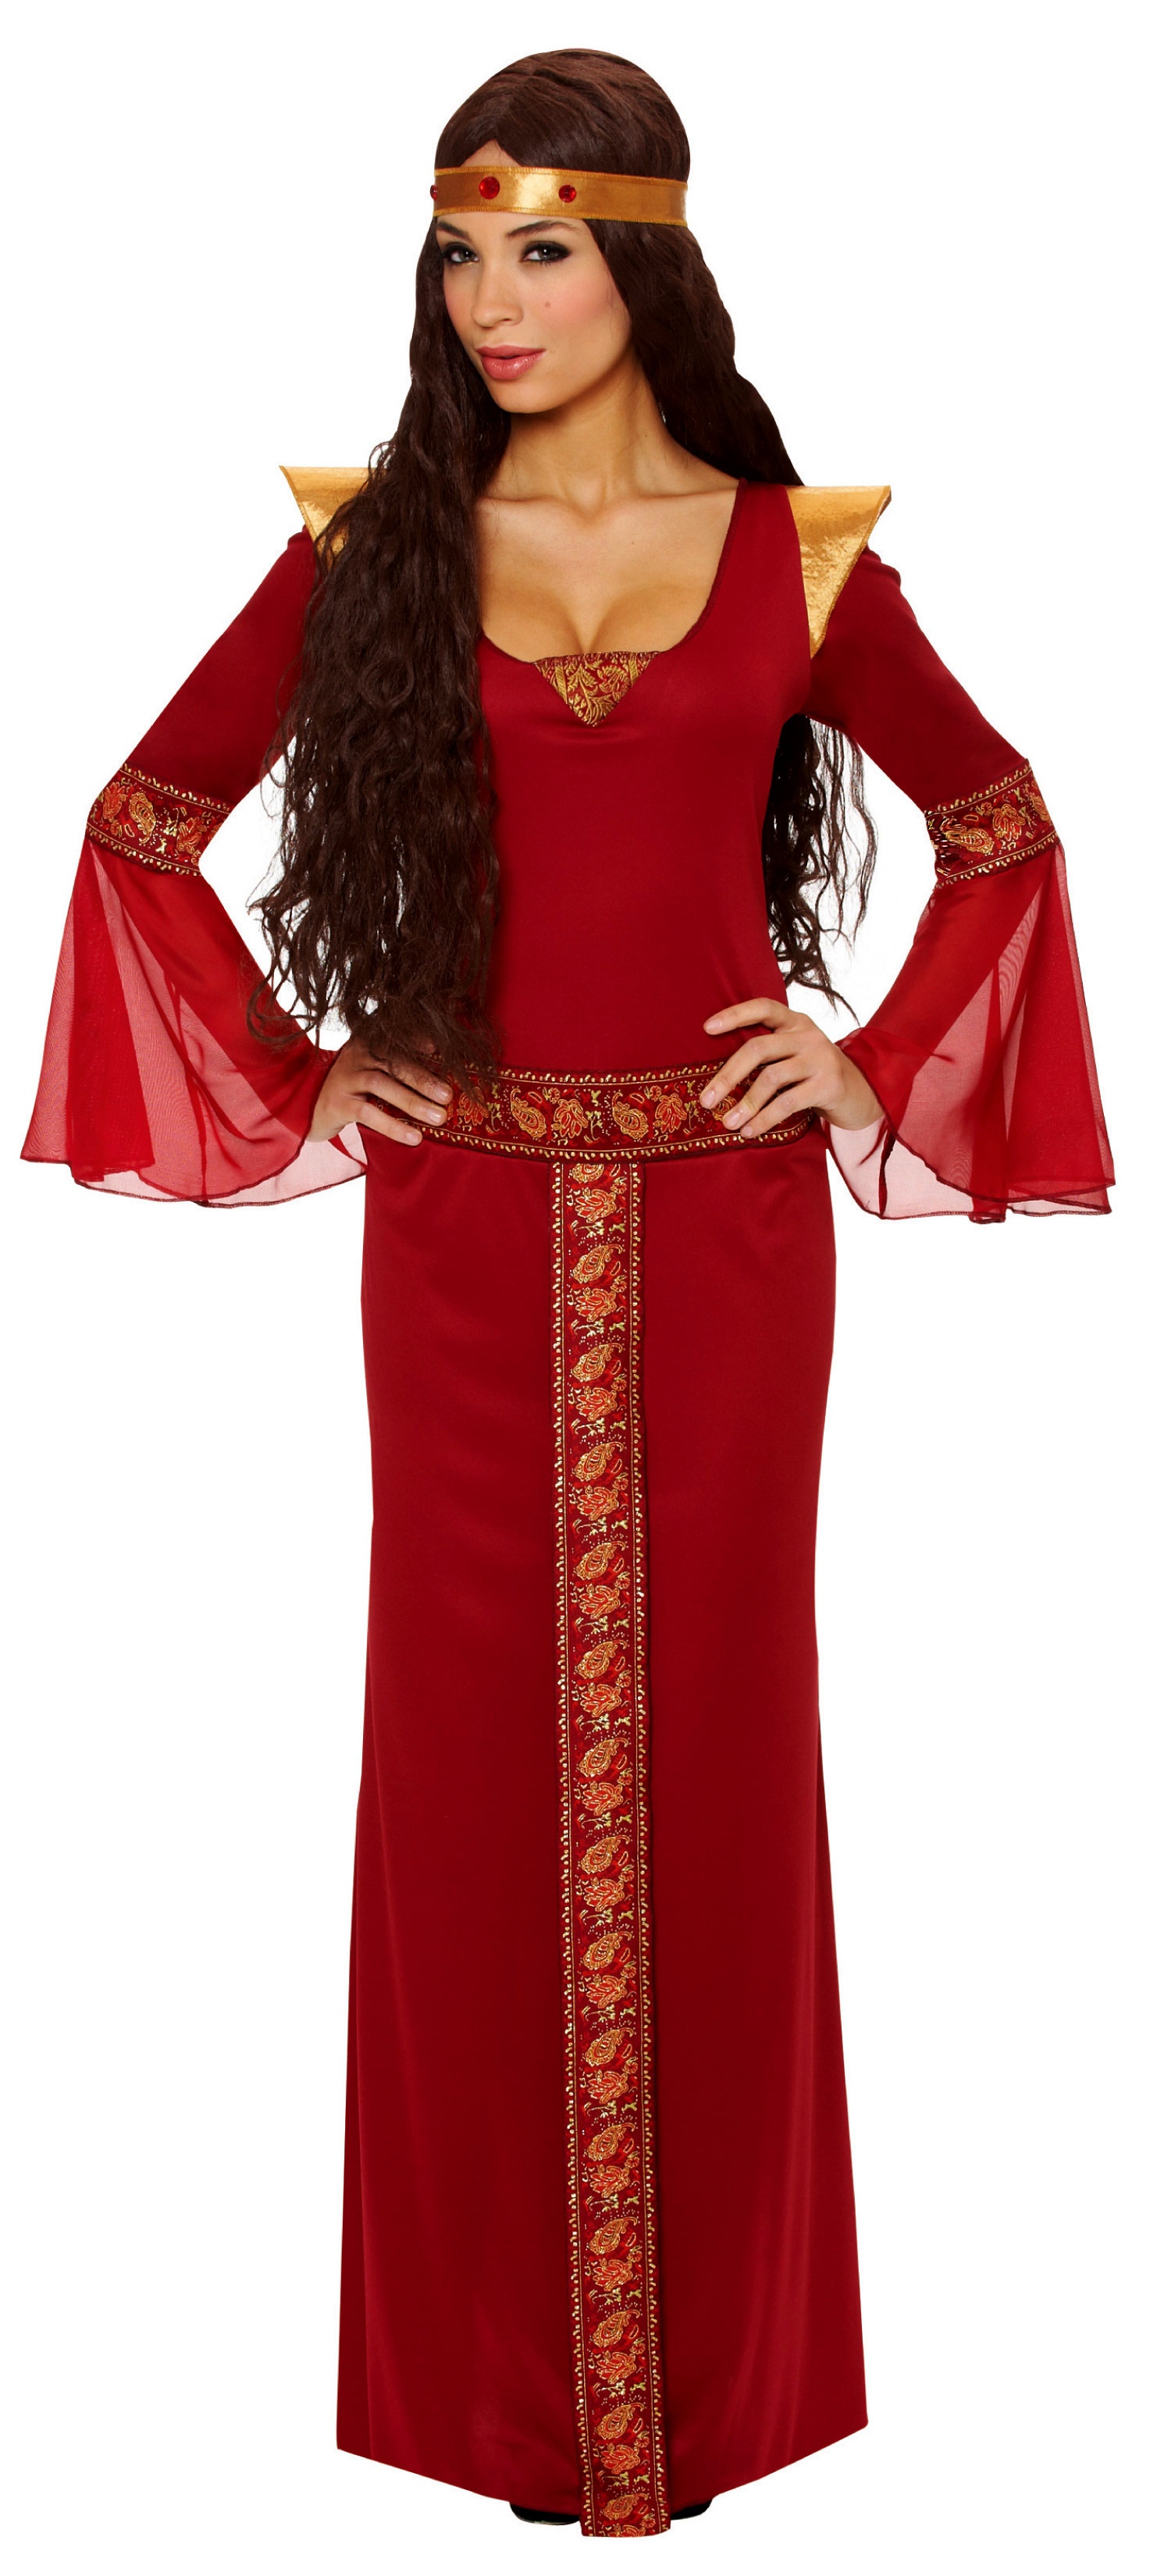 Lady Guinevere Dress